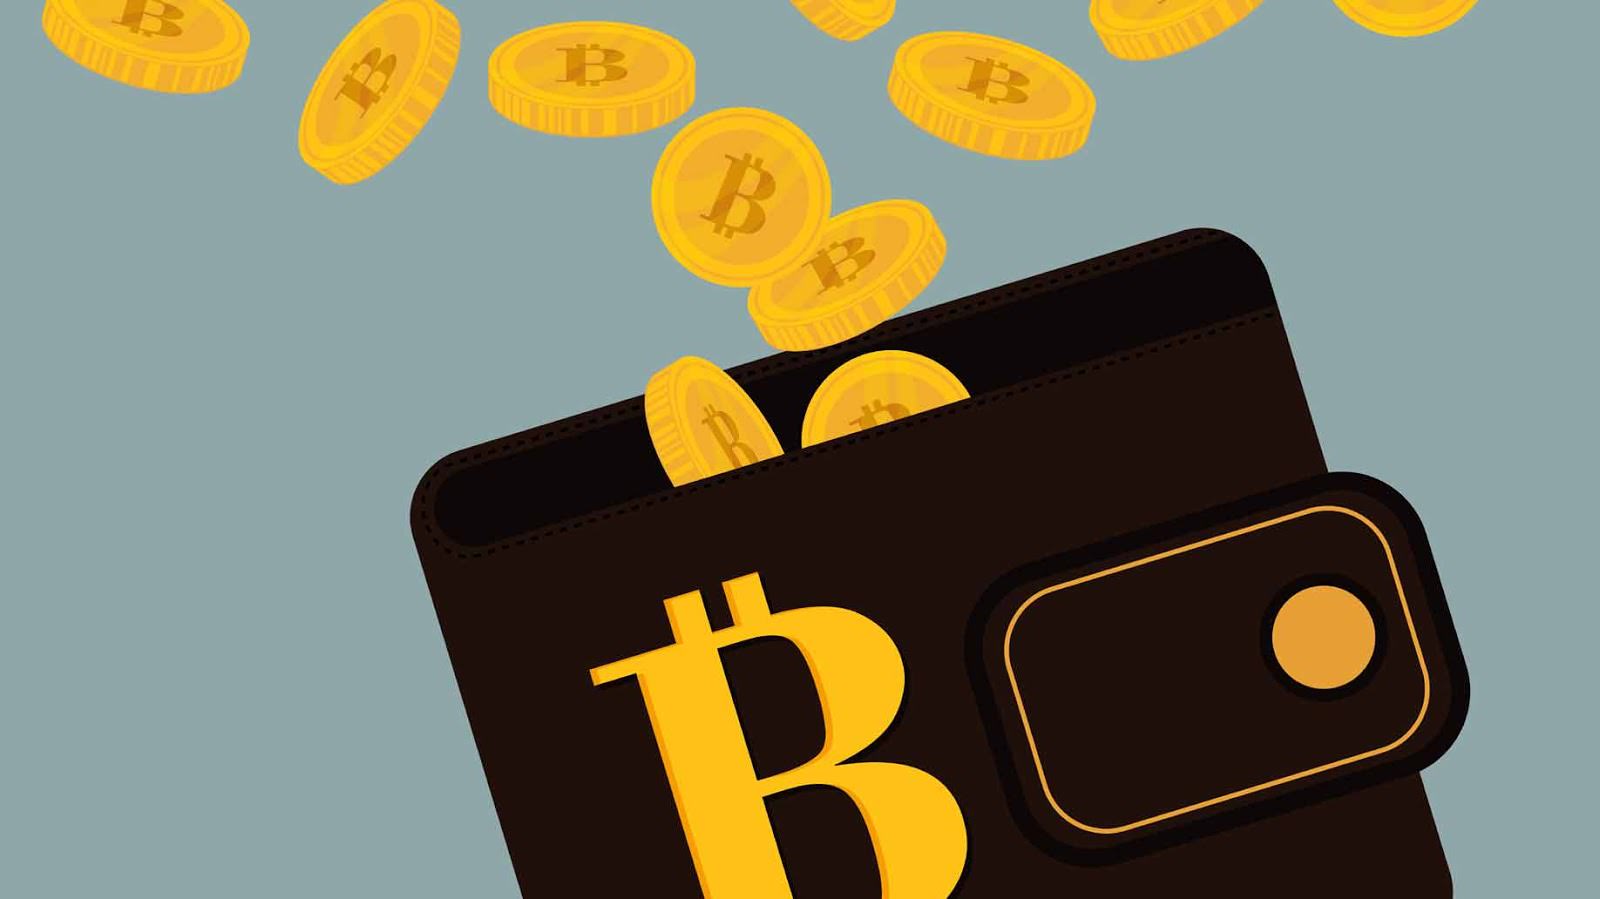 Where to buy bitcoin with low fees